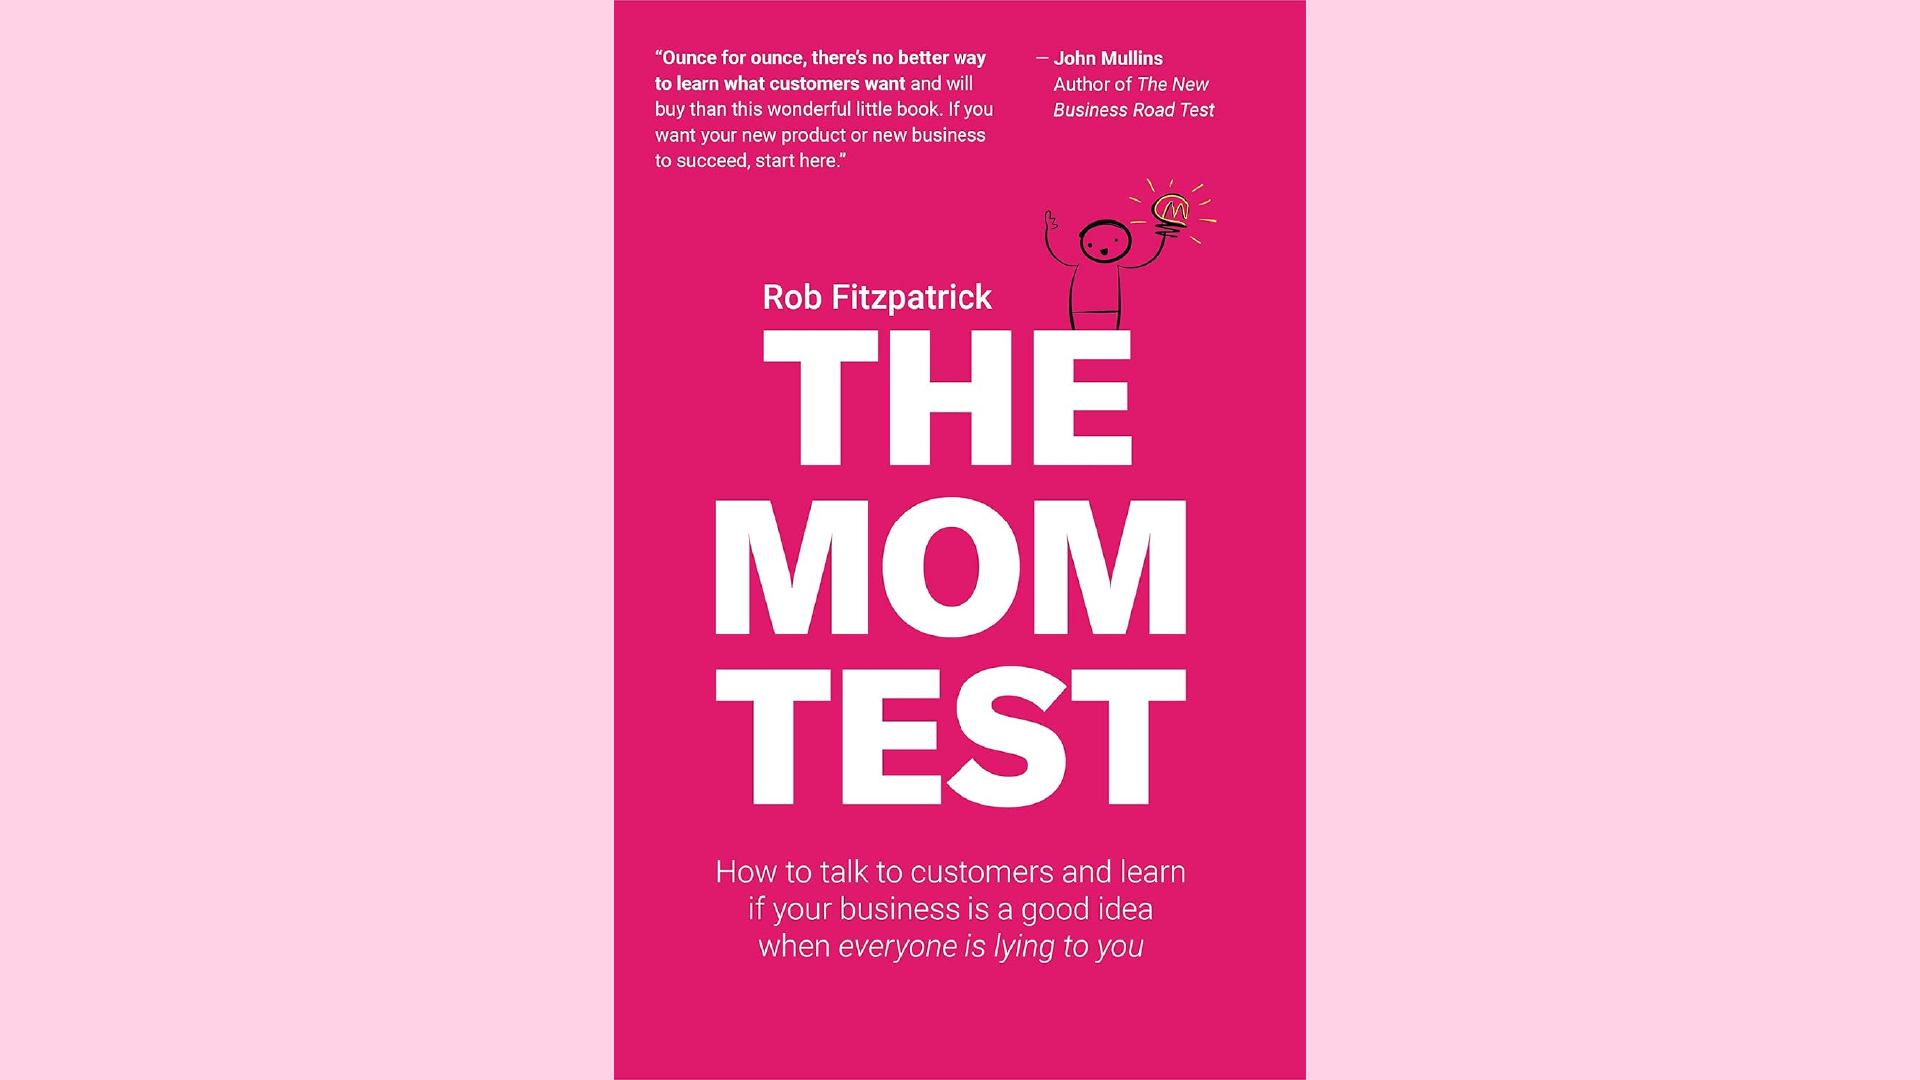 Summary: The Mom Test by Rob Fitzpatrick